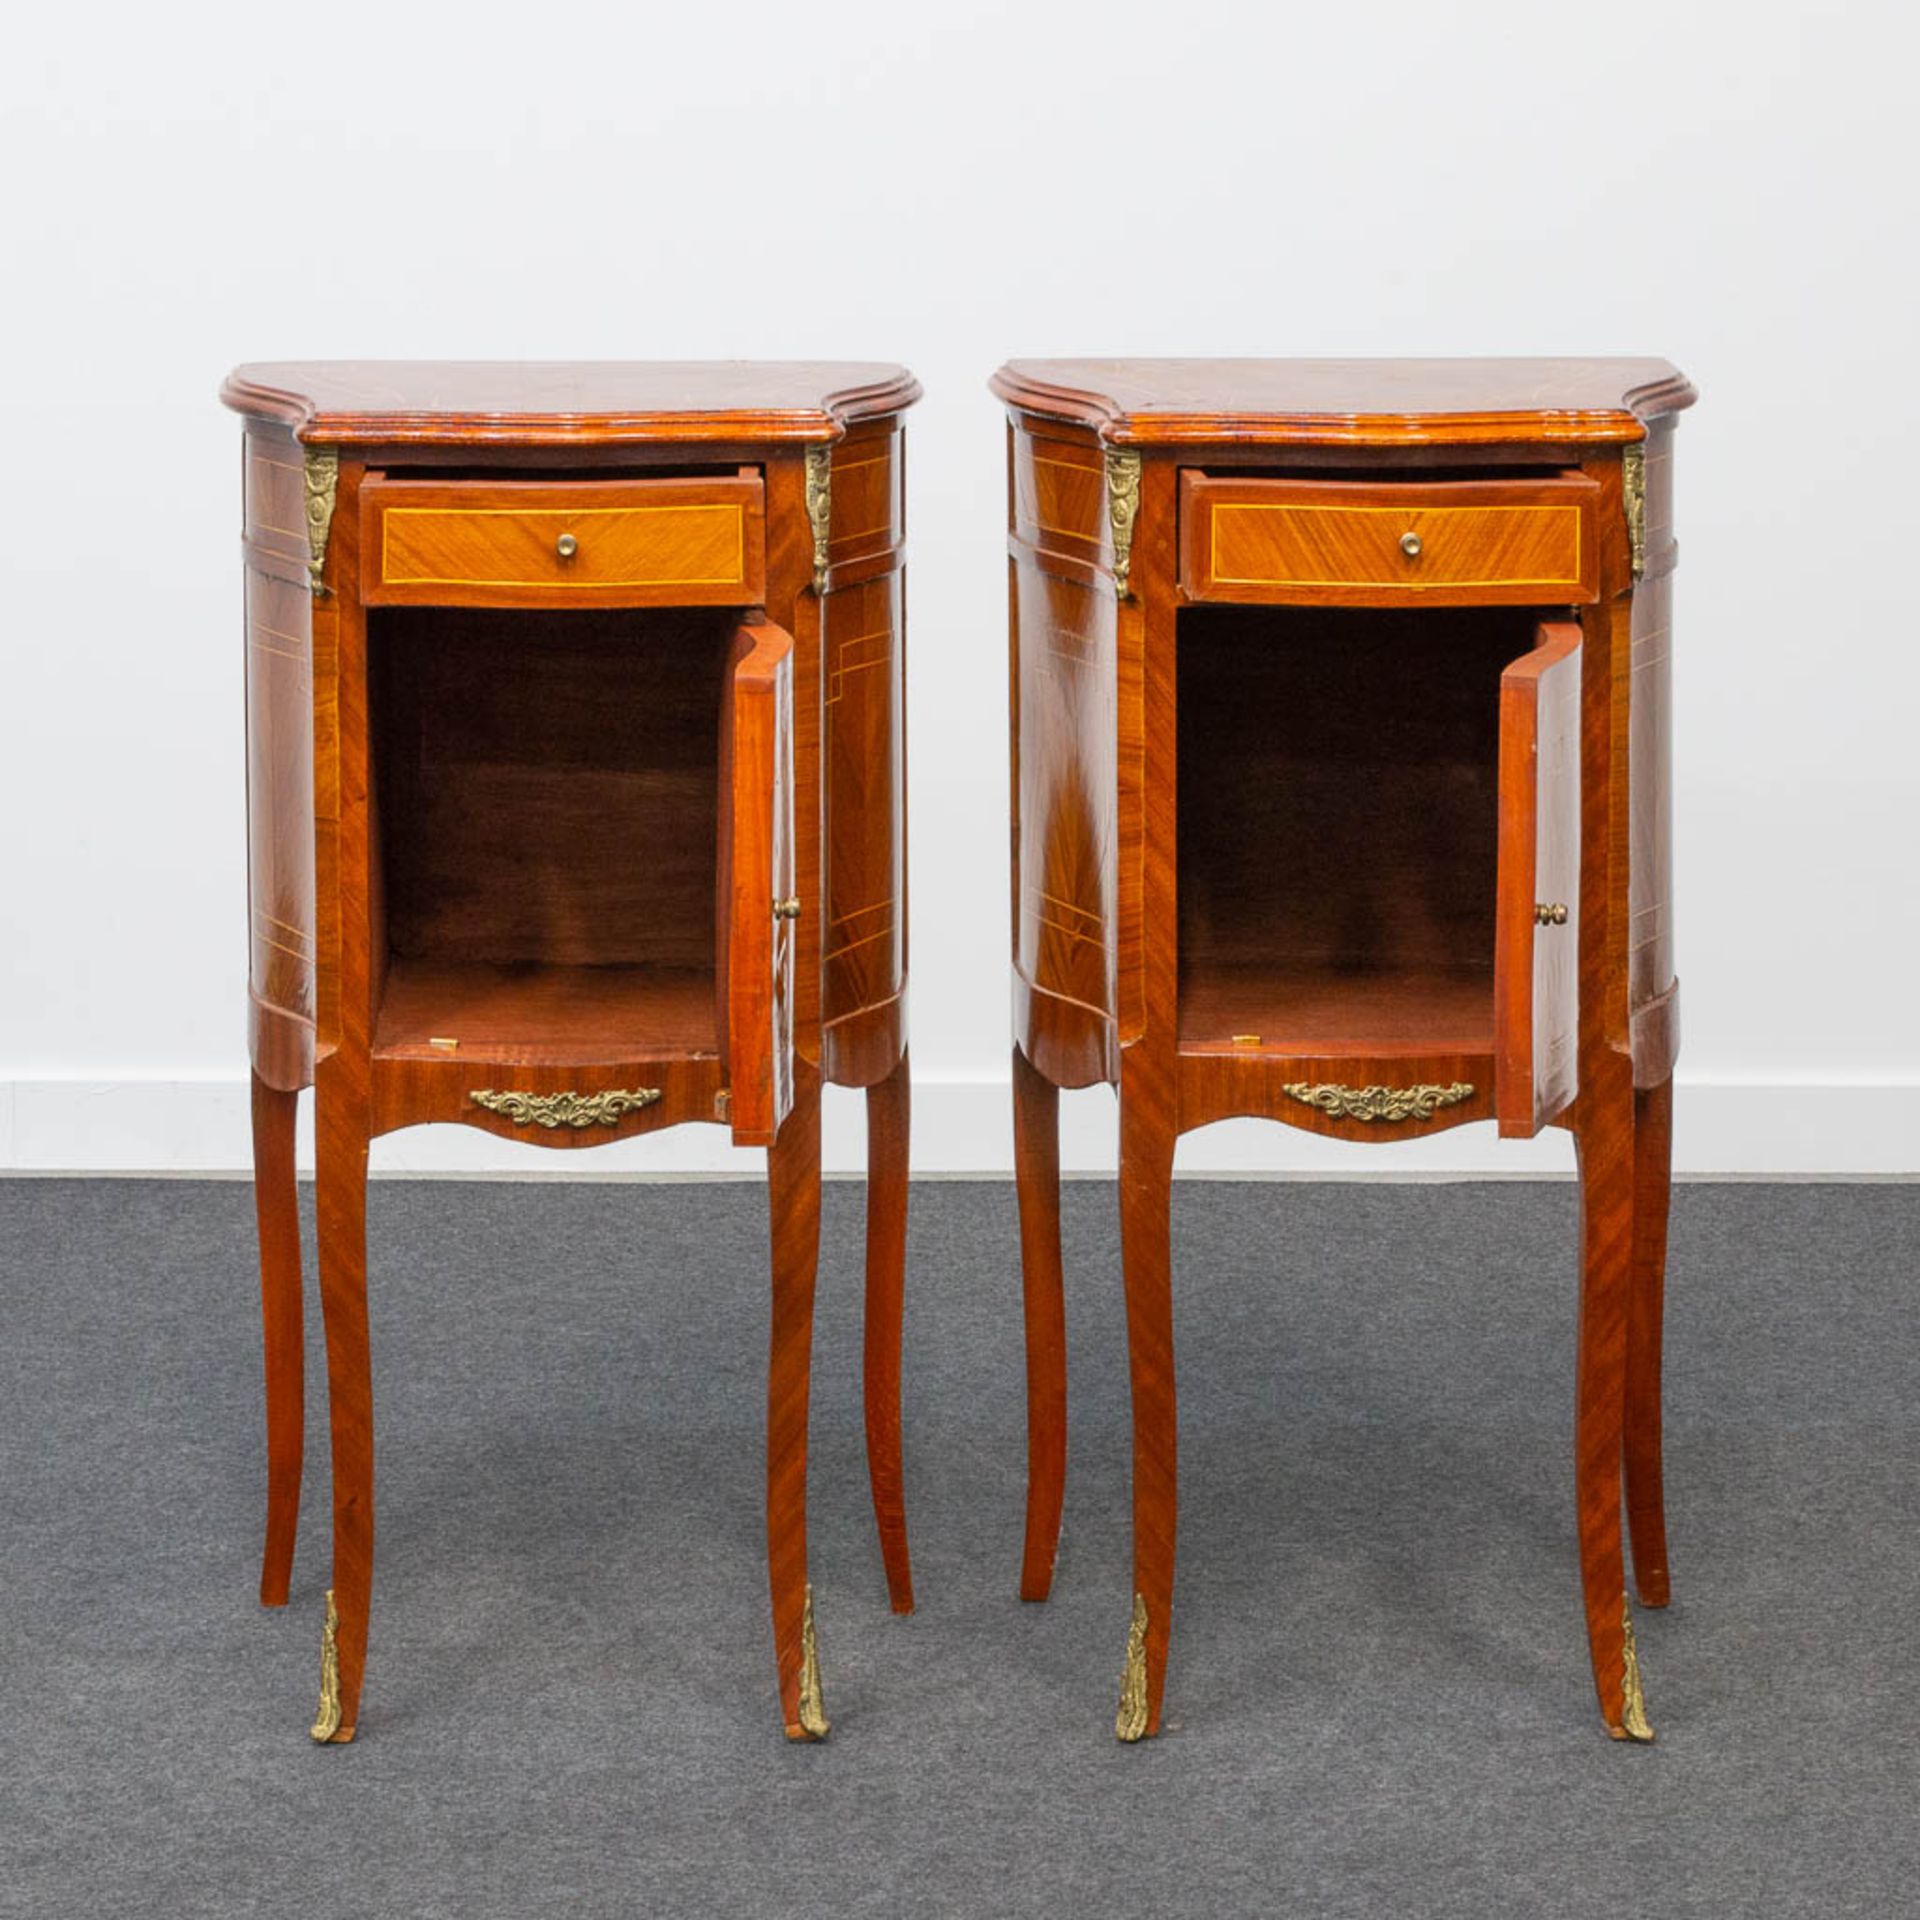 A pair of bronze mounted nightstands, inlaid with marquetry. Second half of the 20th century. - Image 2 of 22